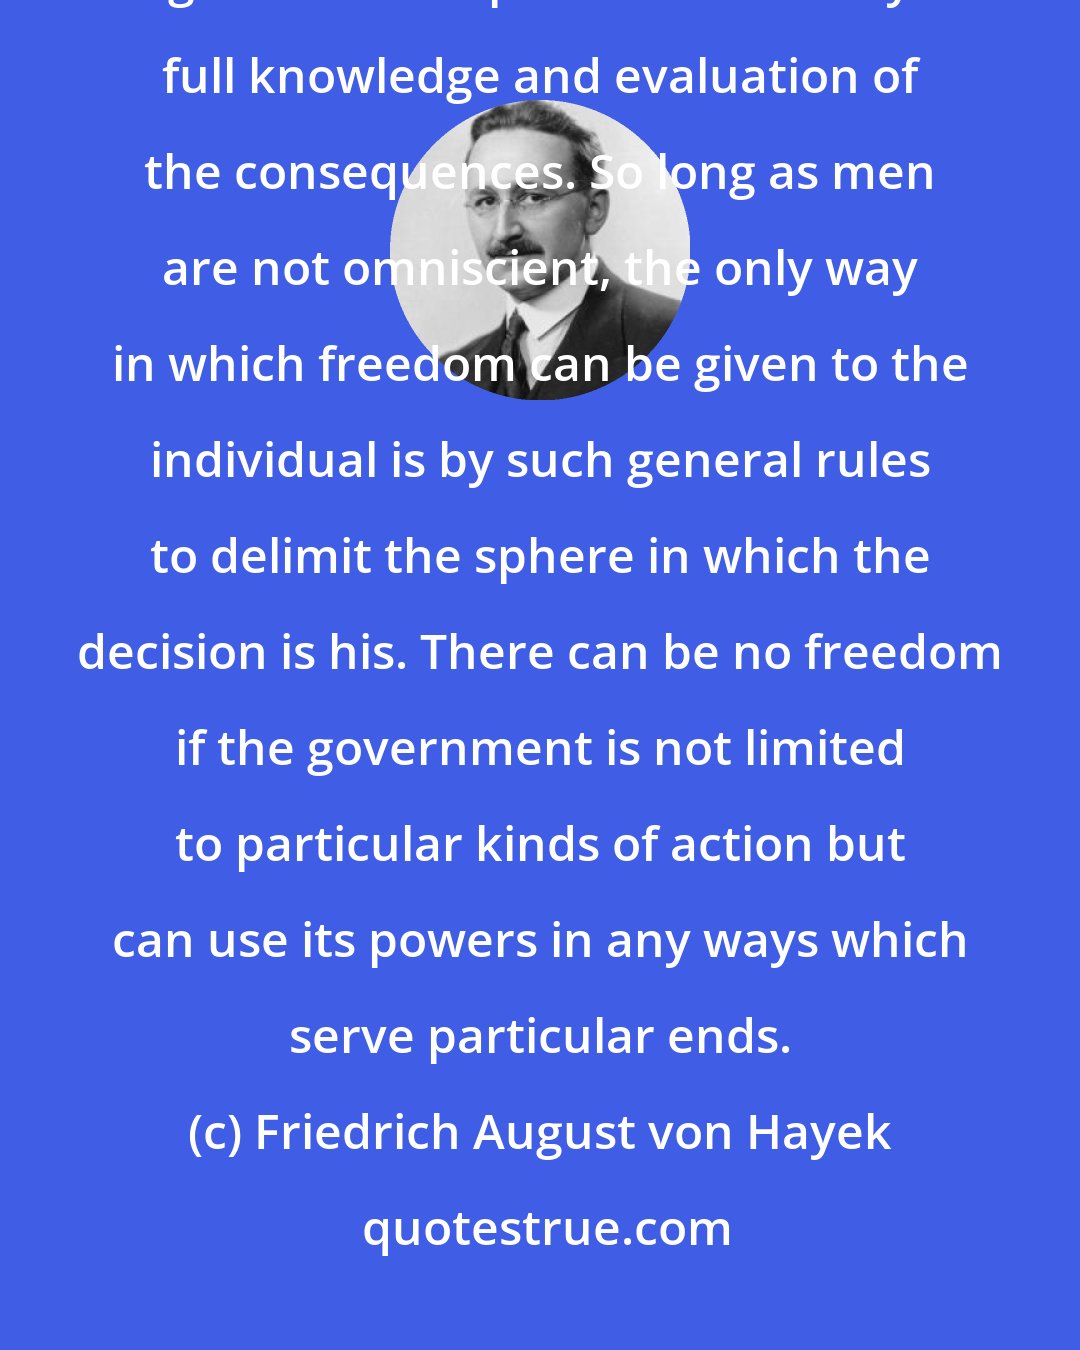 Friedrich August von Hayek: Our submission to general principles is necessary because we cannot be guided in our practical action by full knowledge and evaluation of the consequences. So long as men are not omniscient, the only way in which freedom can be given to the individual is by such general rules to delimit the sphere in which the decision is his. There can be no freedom if the government is not limited to particular kinds of action but can use its powers in any ways which serve particular ends.